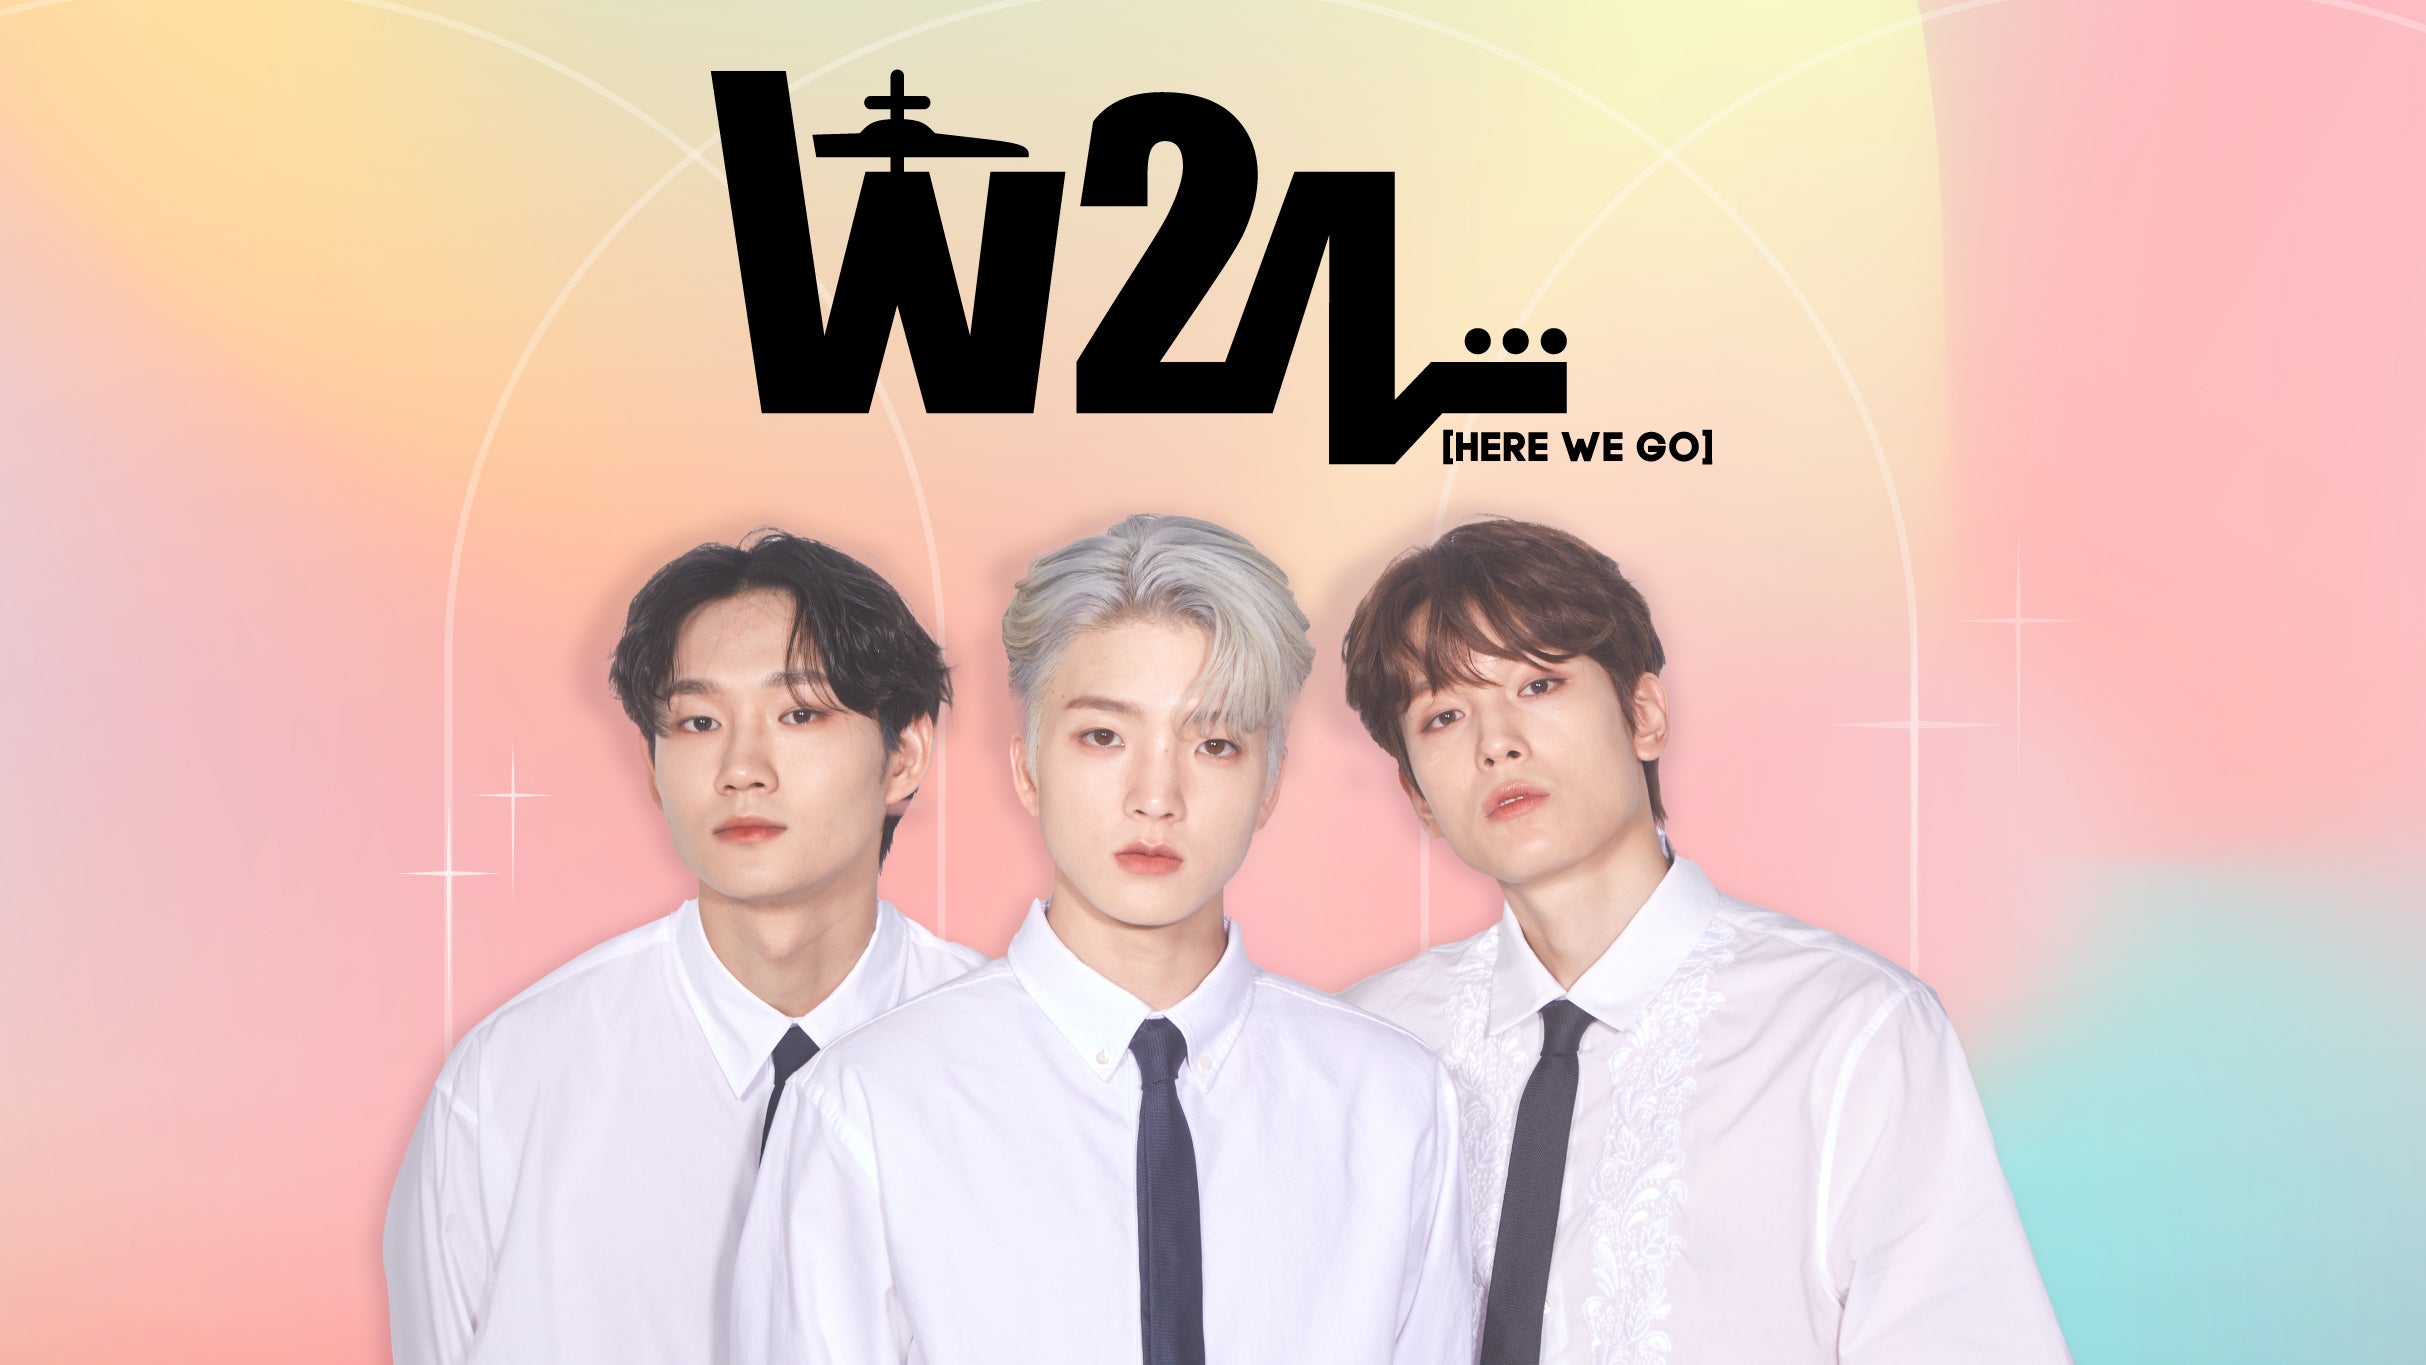 w24 in México promo photo for Paquete VIP presale offer code